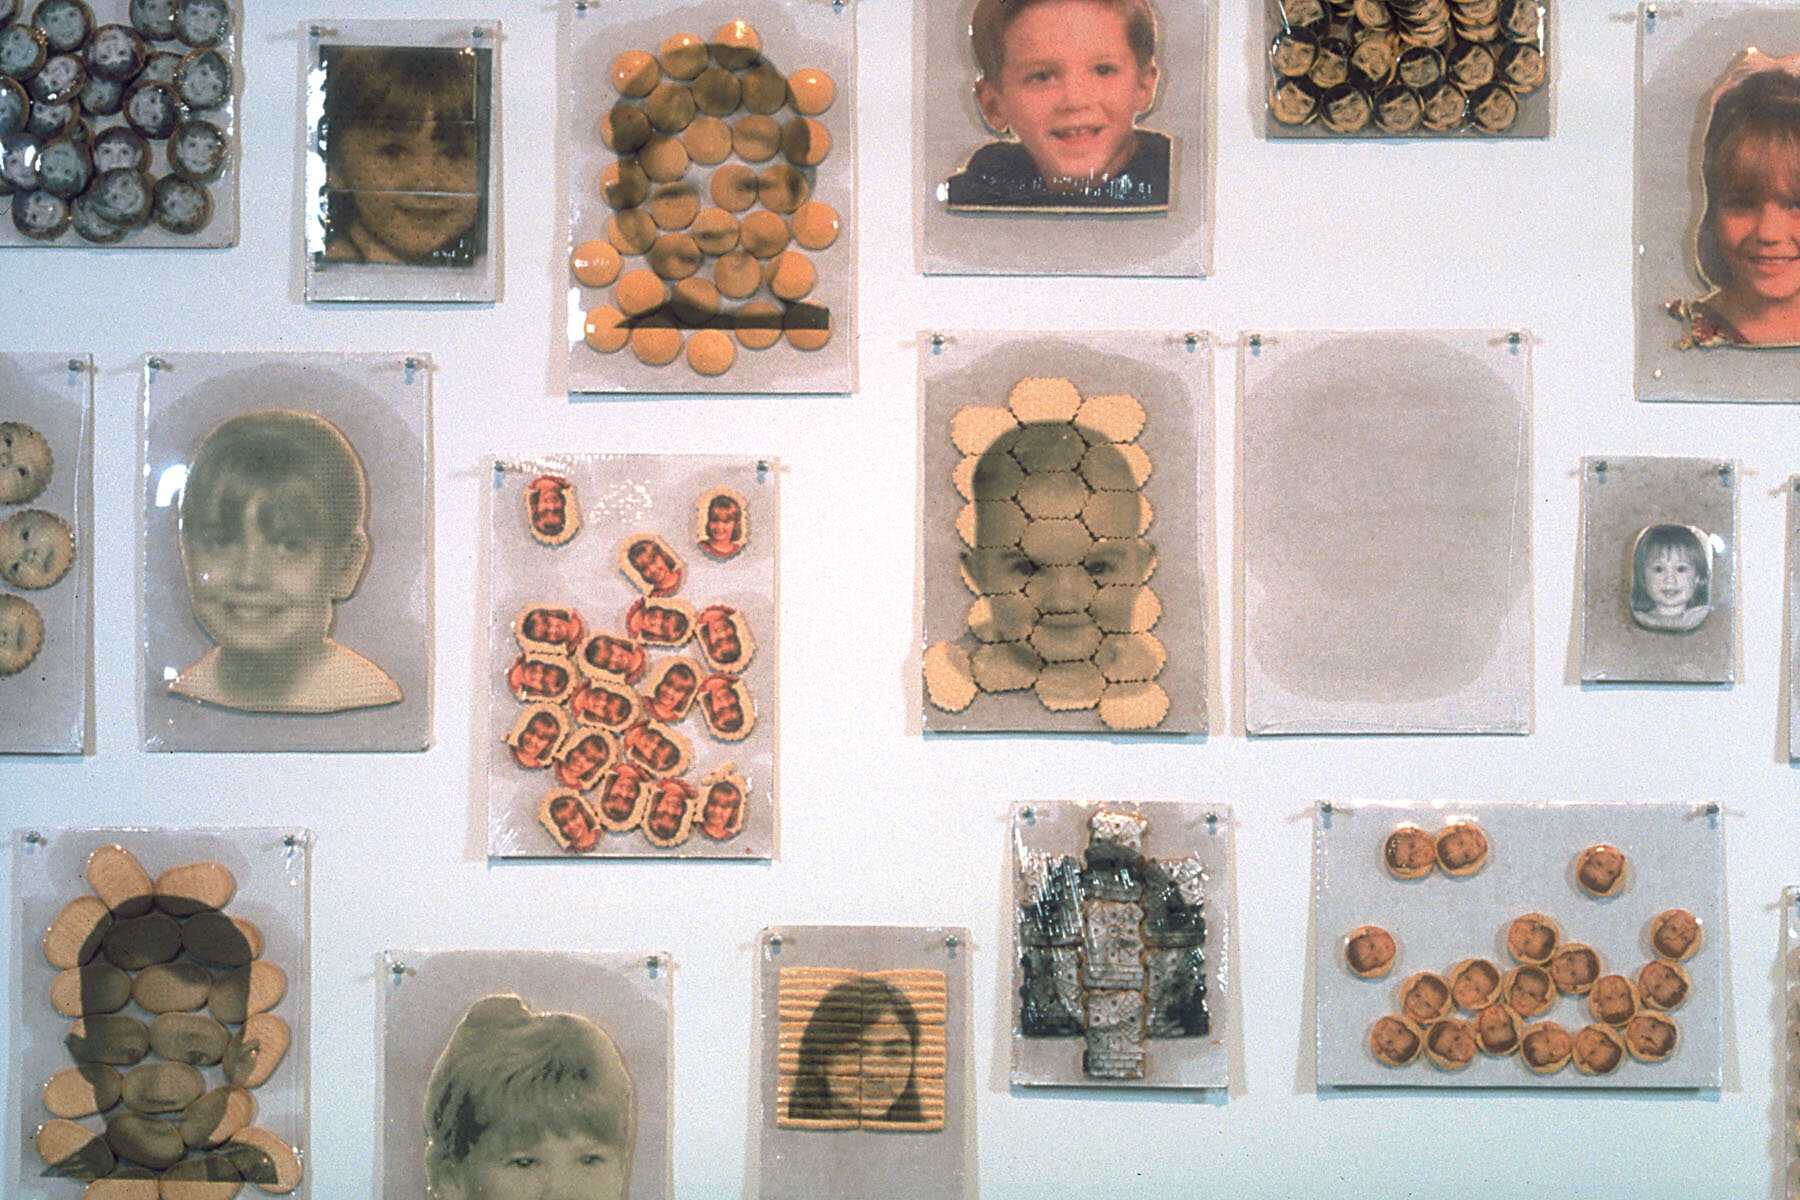   Untitled (cookies) , installation detail, 1997, food coloring, ink, cookies, cardboard, shrink wrap, push pins, 38 x 60 x 1 inches 